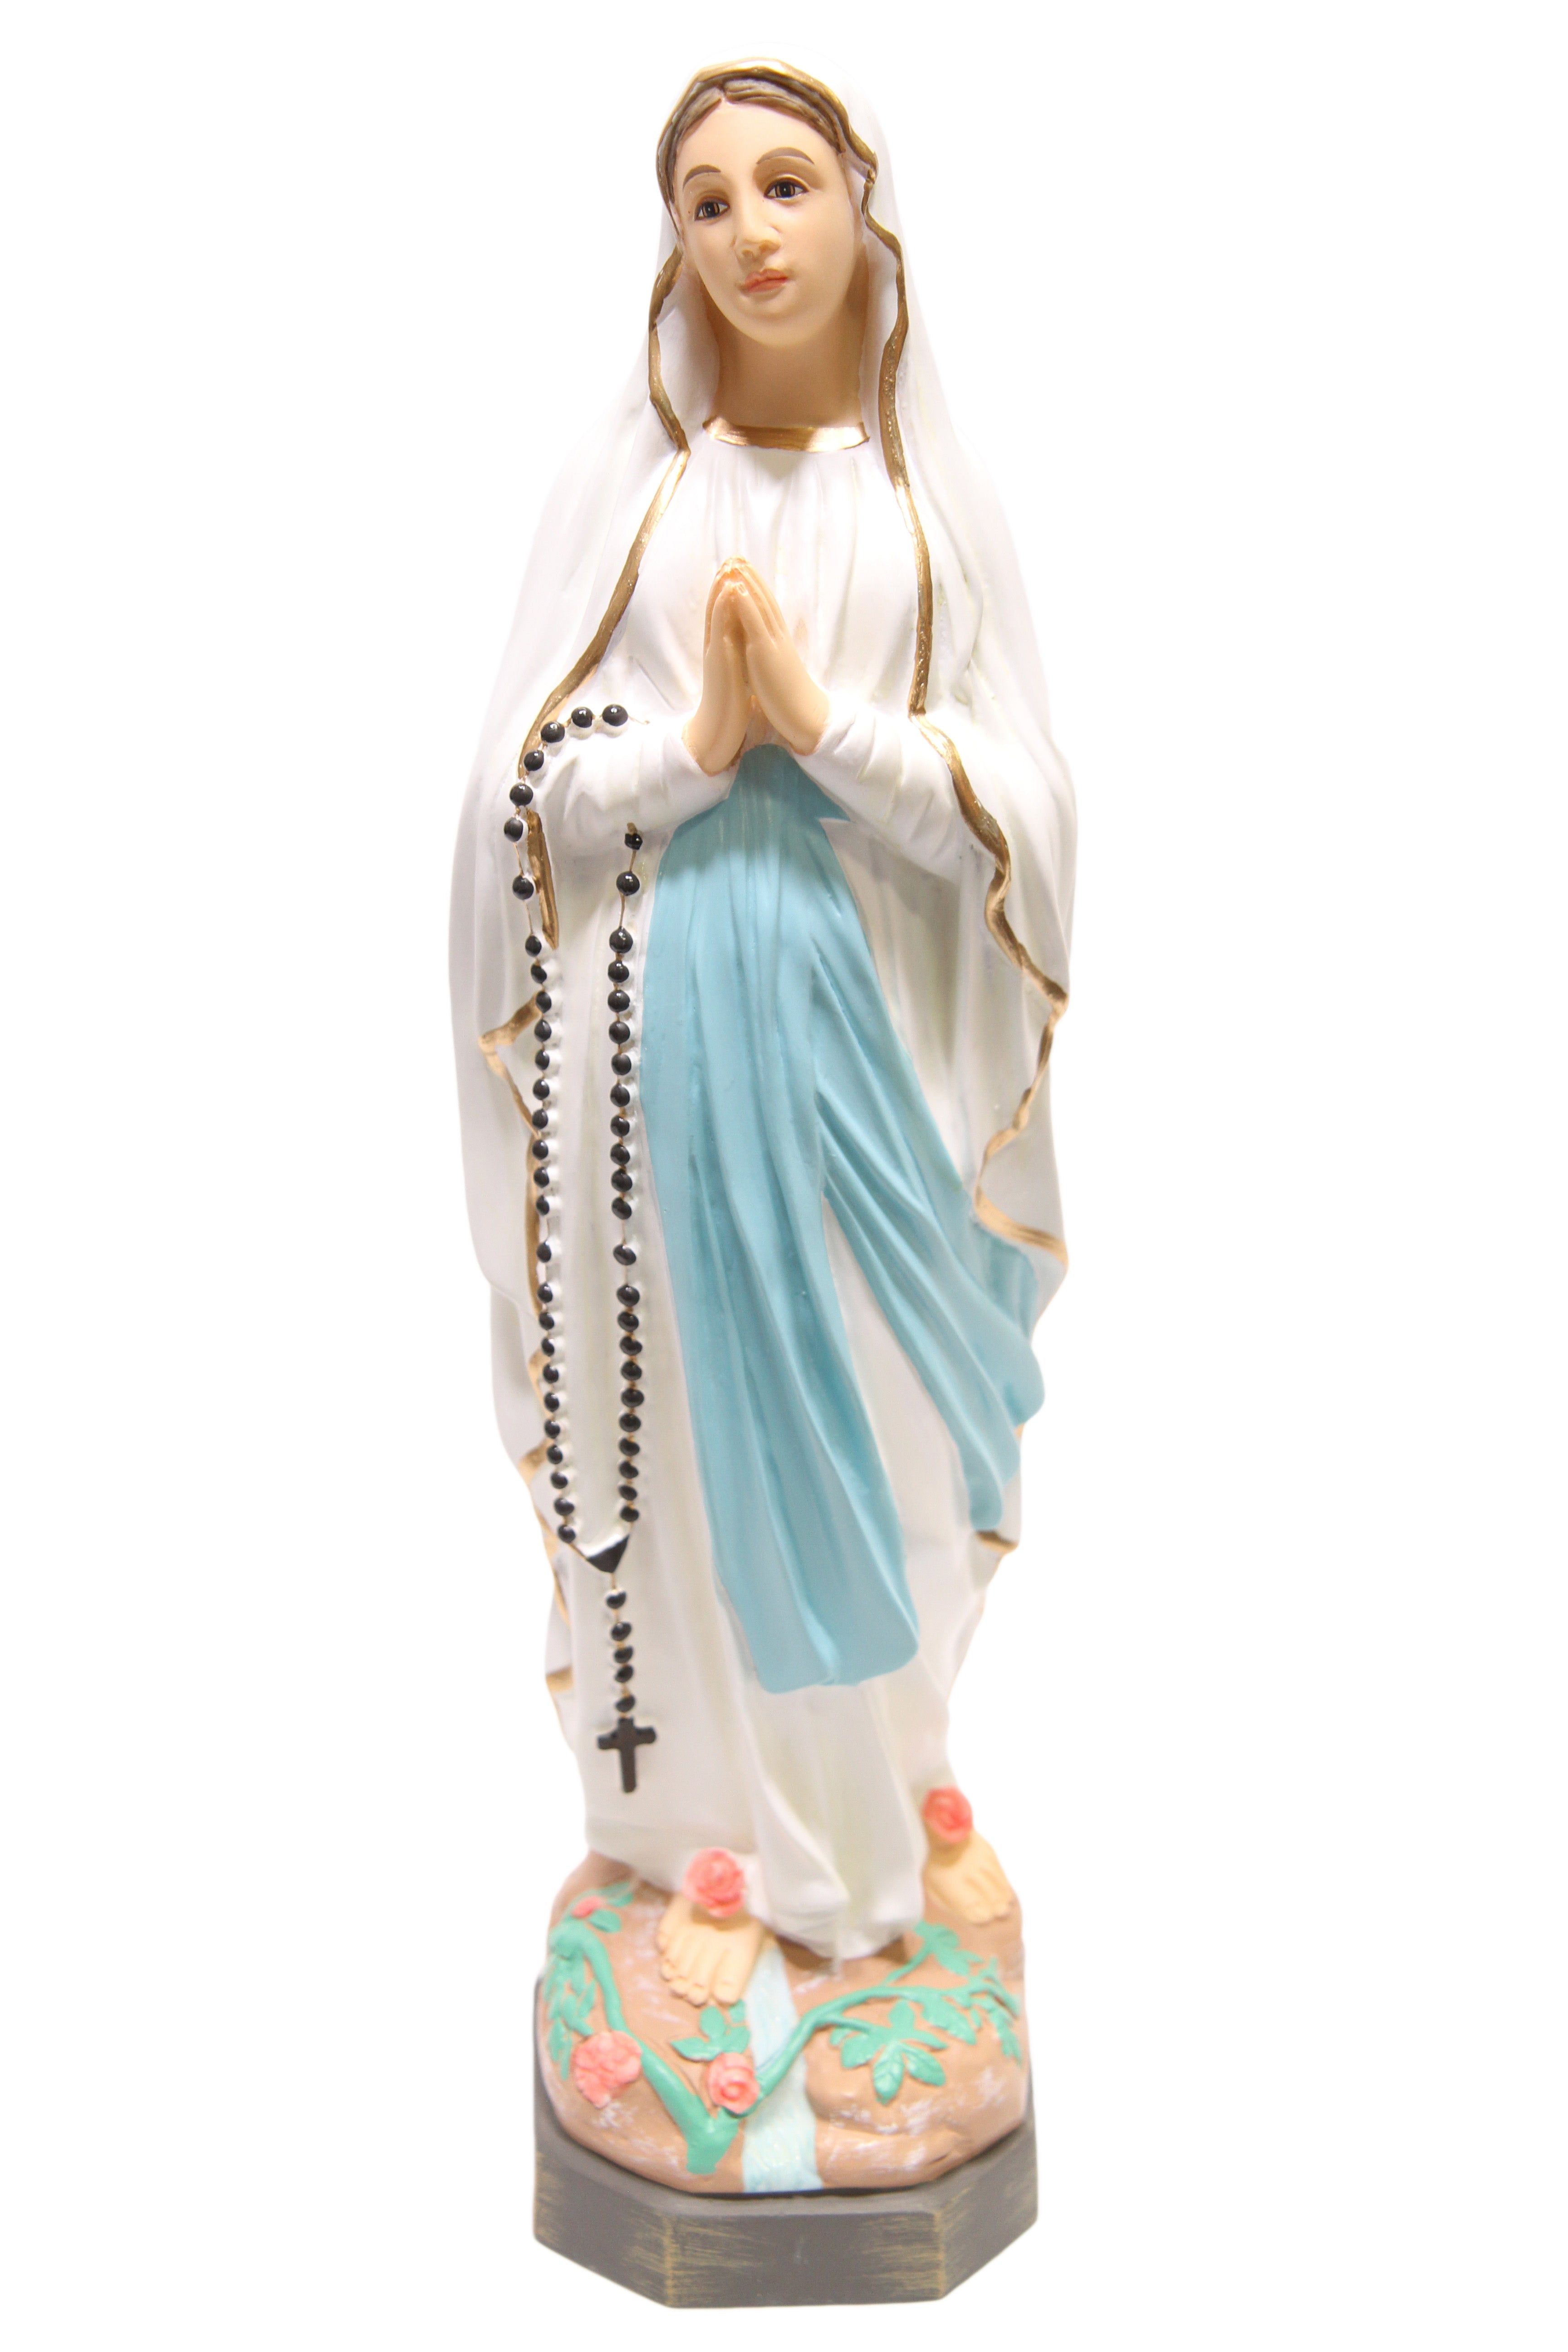 16 Inch Our Lady of Lourdes Virgin Mary Catholic Statue Vittoria Collection Made in Italy Hand Painted